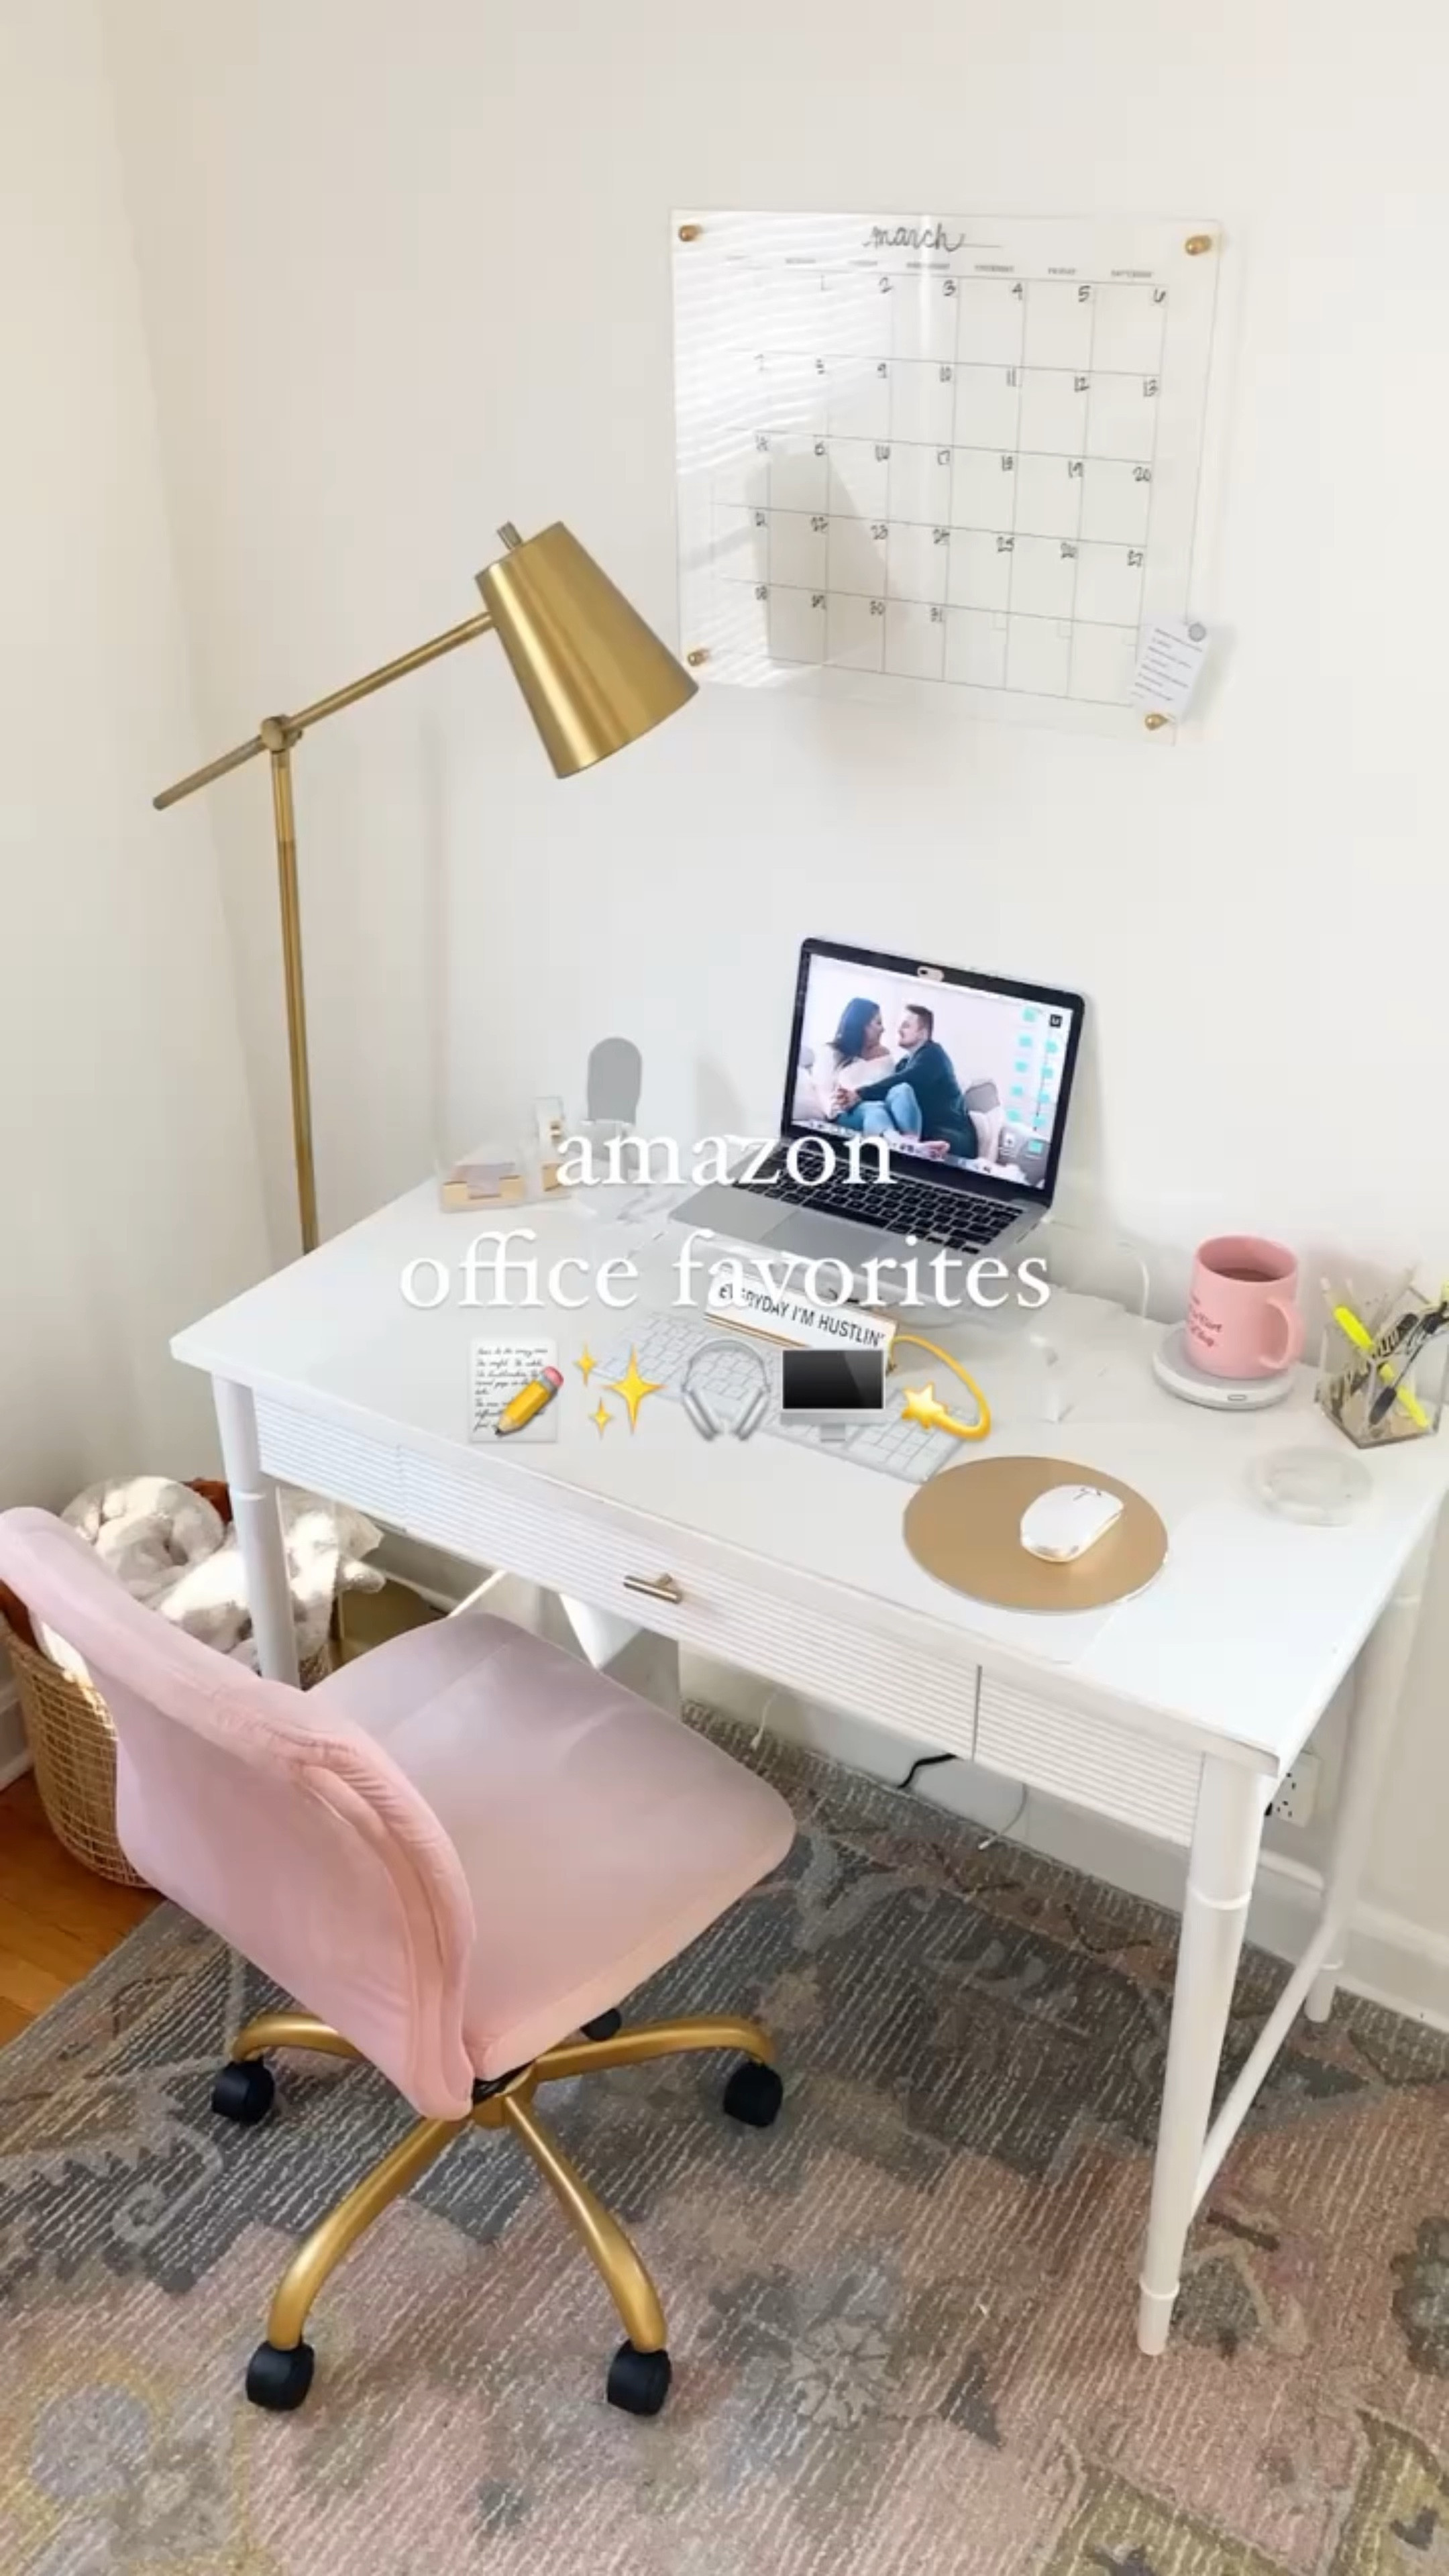 Office Decor Must-Haves - queencarlene